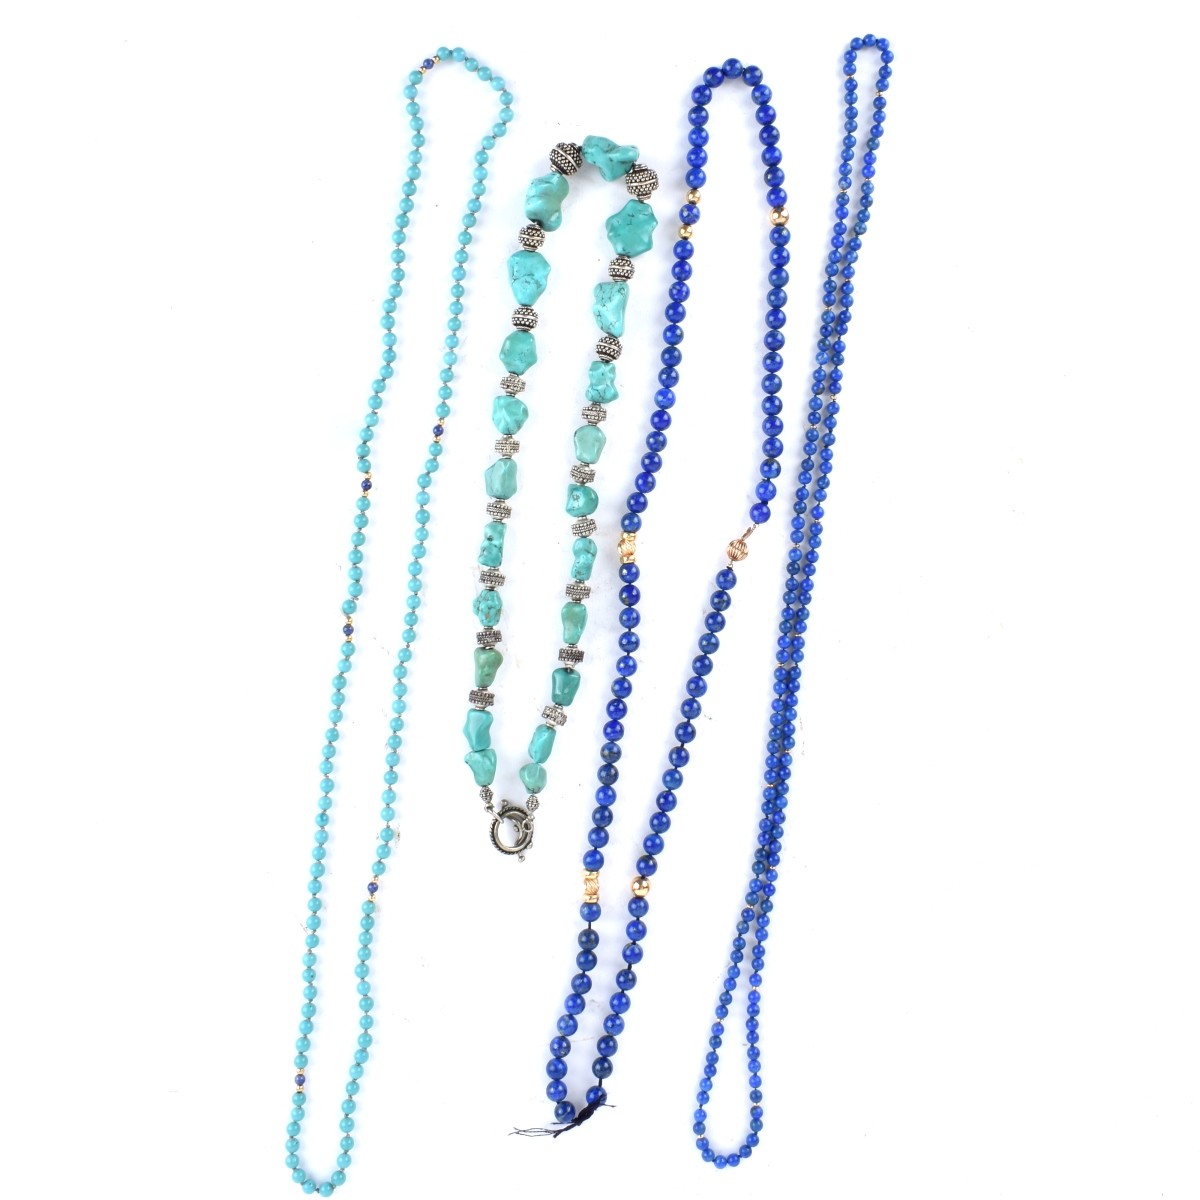 Lapis and Turquoise Bead Necklaces